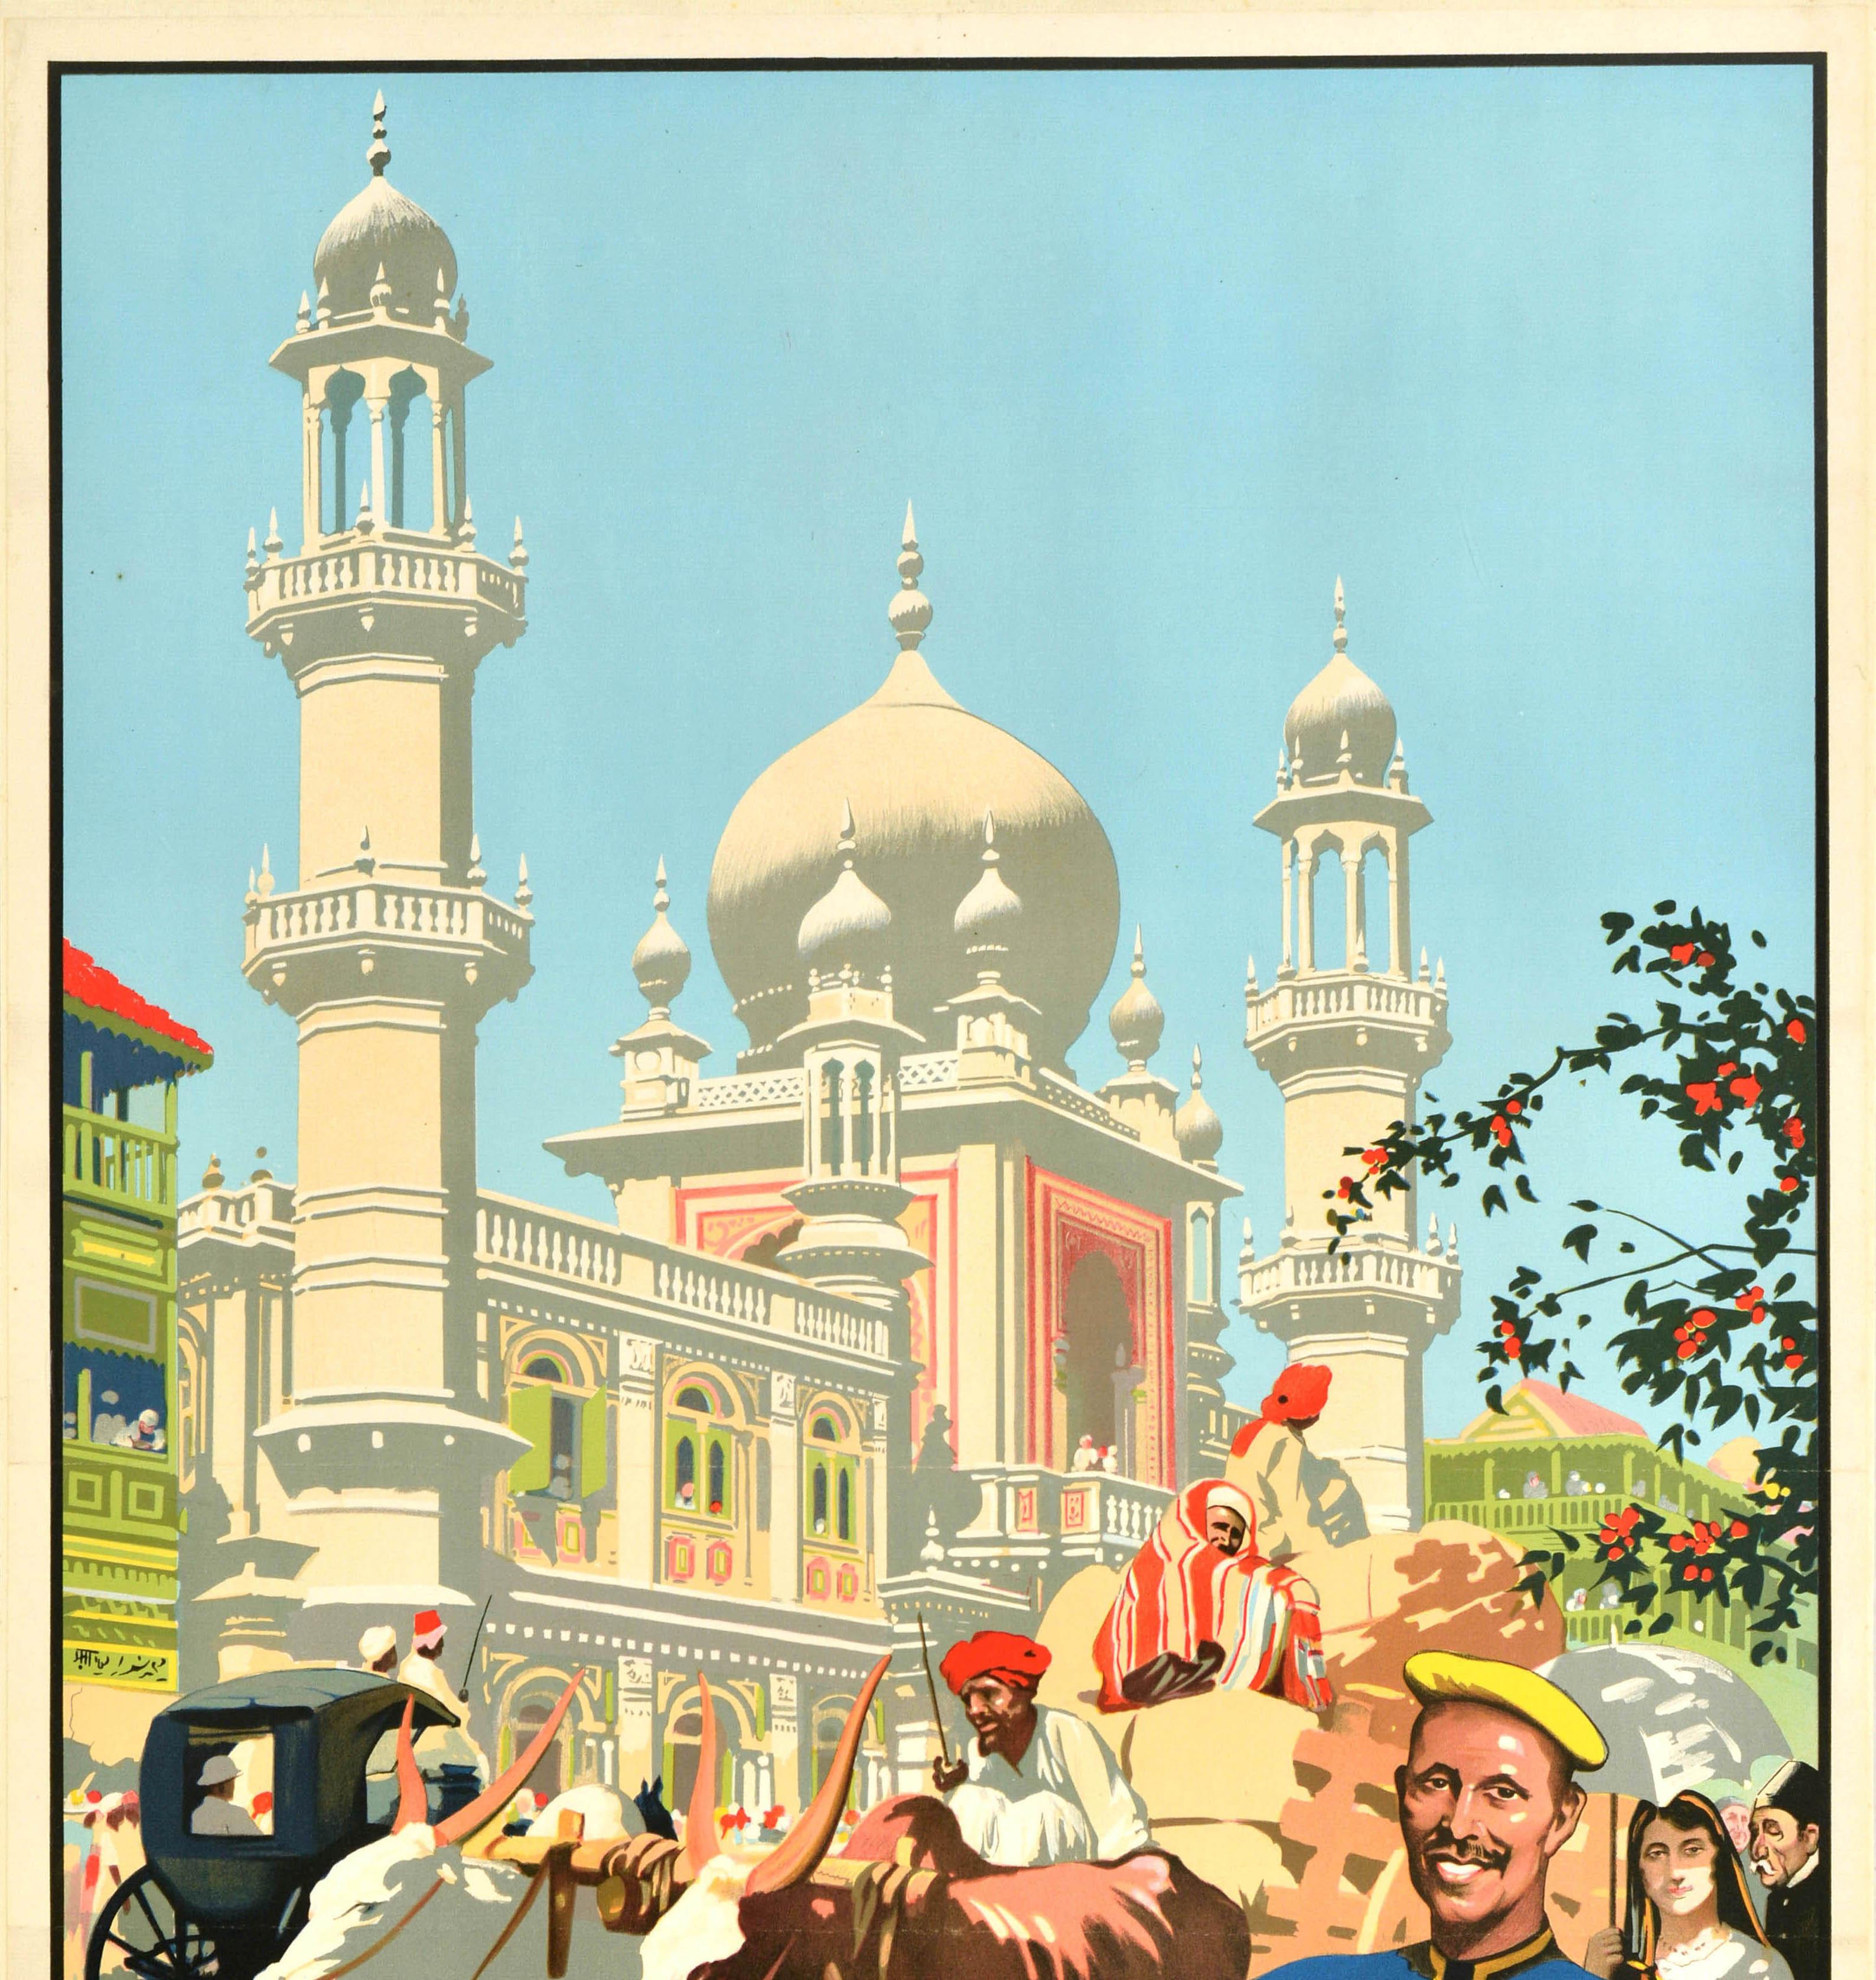 Original Vintage Travel Poster Bombay See India Mumbai Old Temple Street Design - Beige Print by Unknown